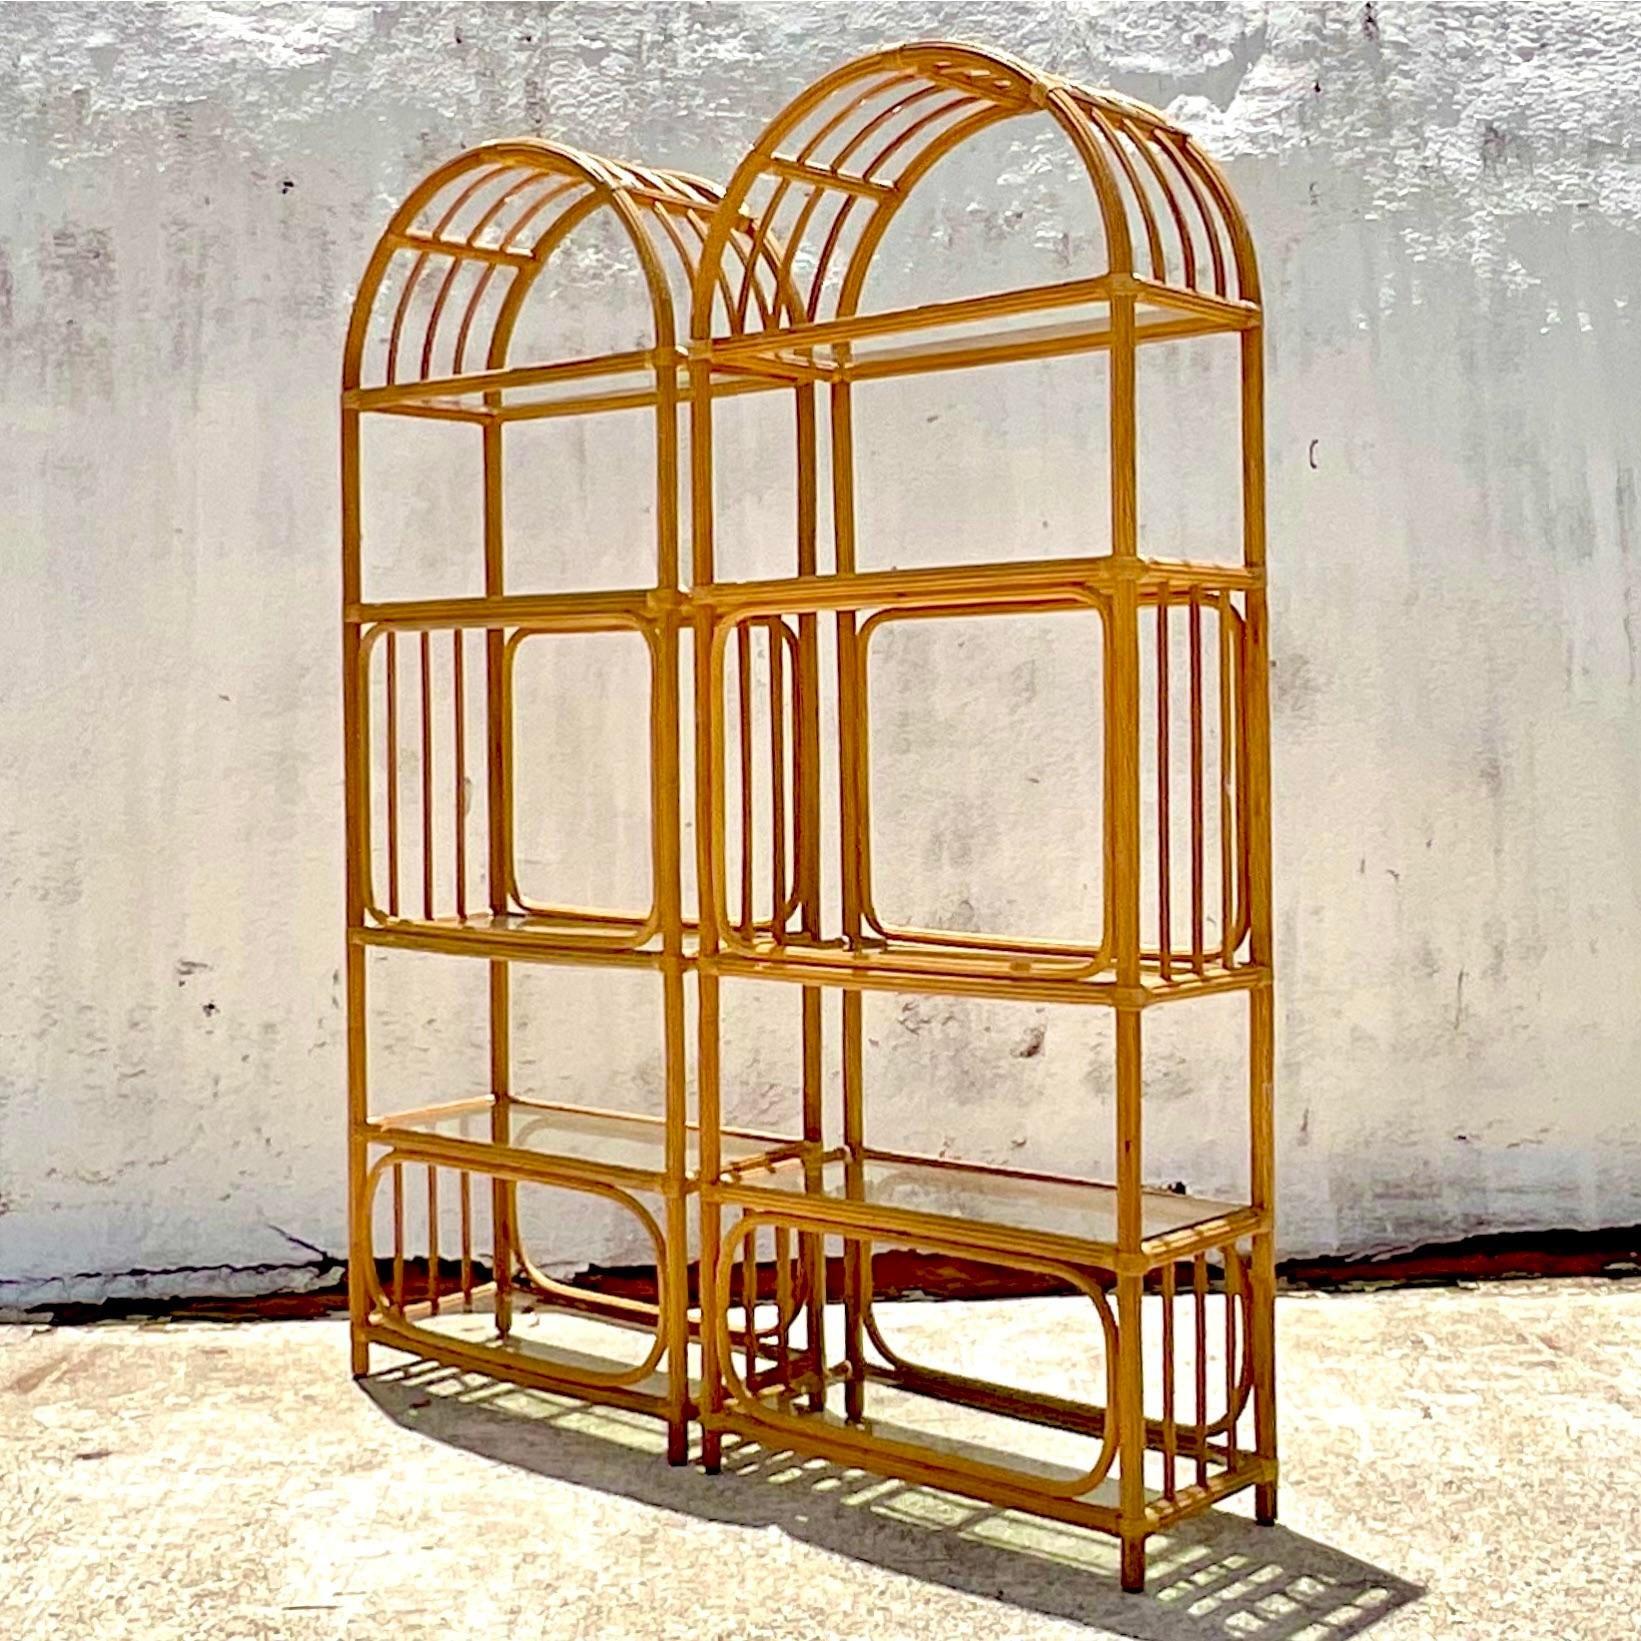 A fabulous pair of vintage Coastal etagere. Beautiful pencil reed construction in a chic arched design. Inset glass shelves. Acquired from a Palm Beach estate.